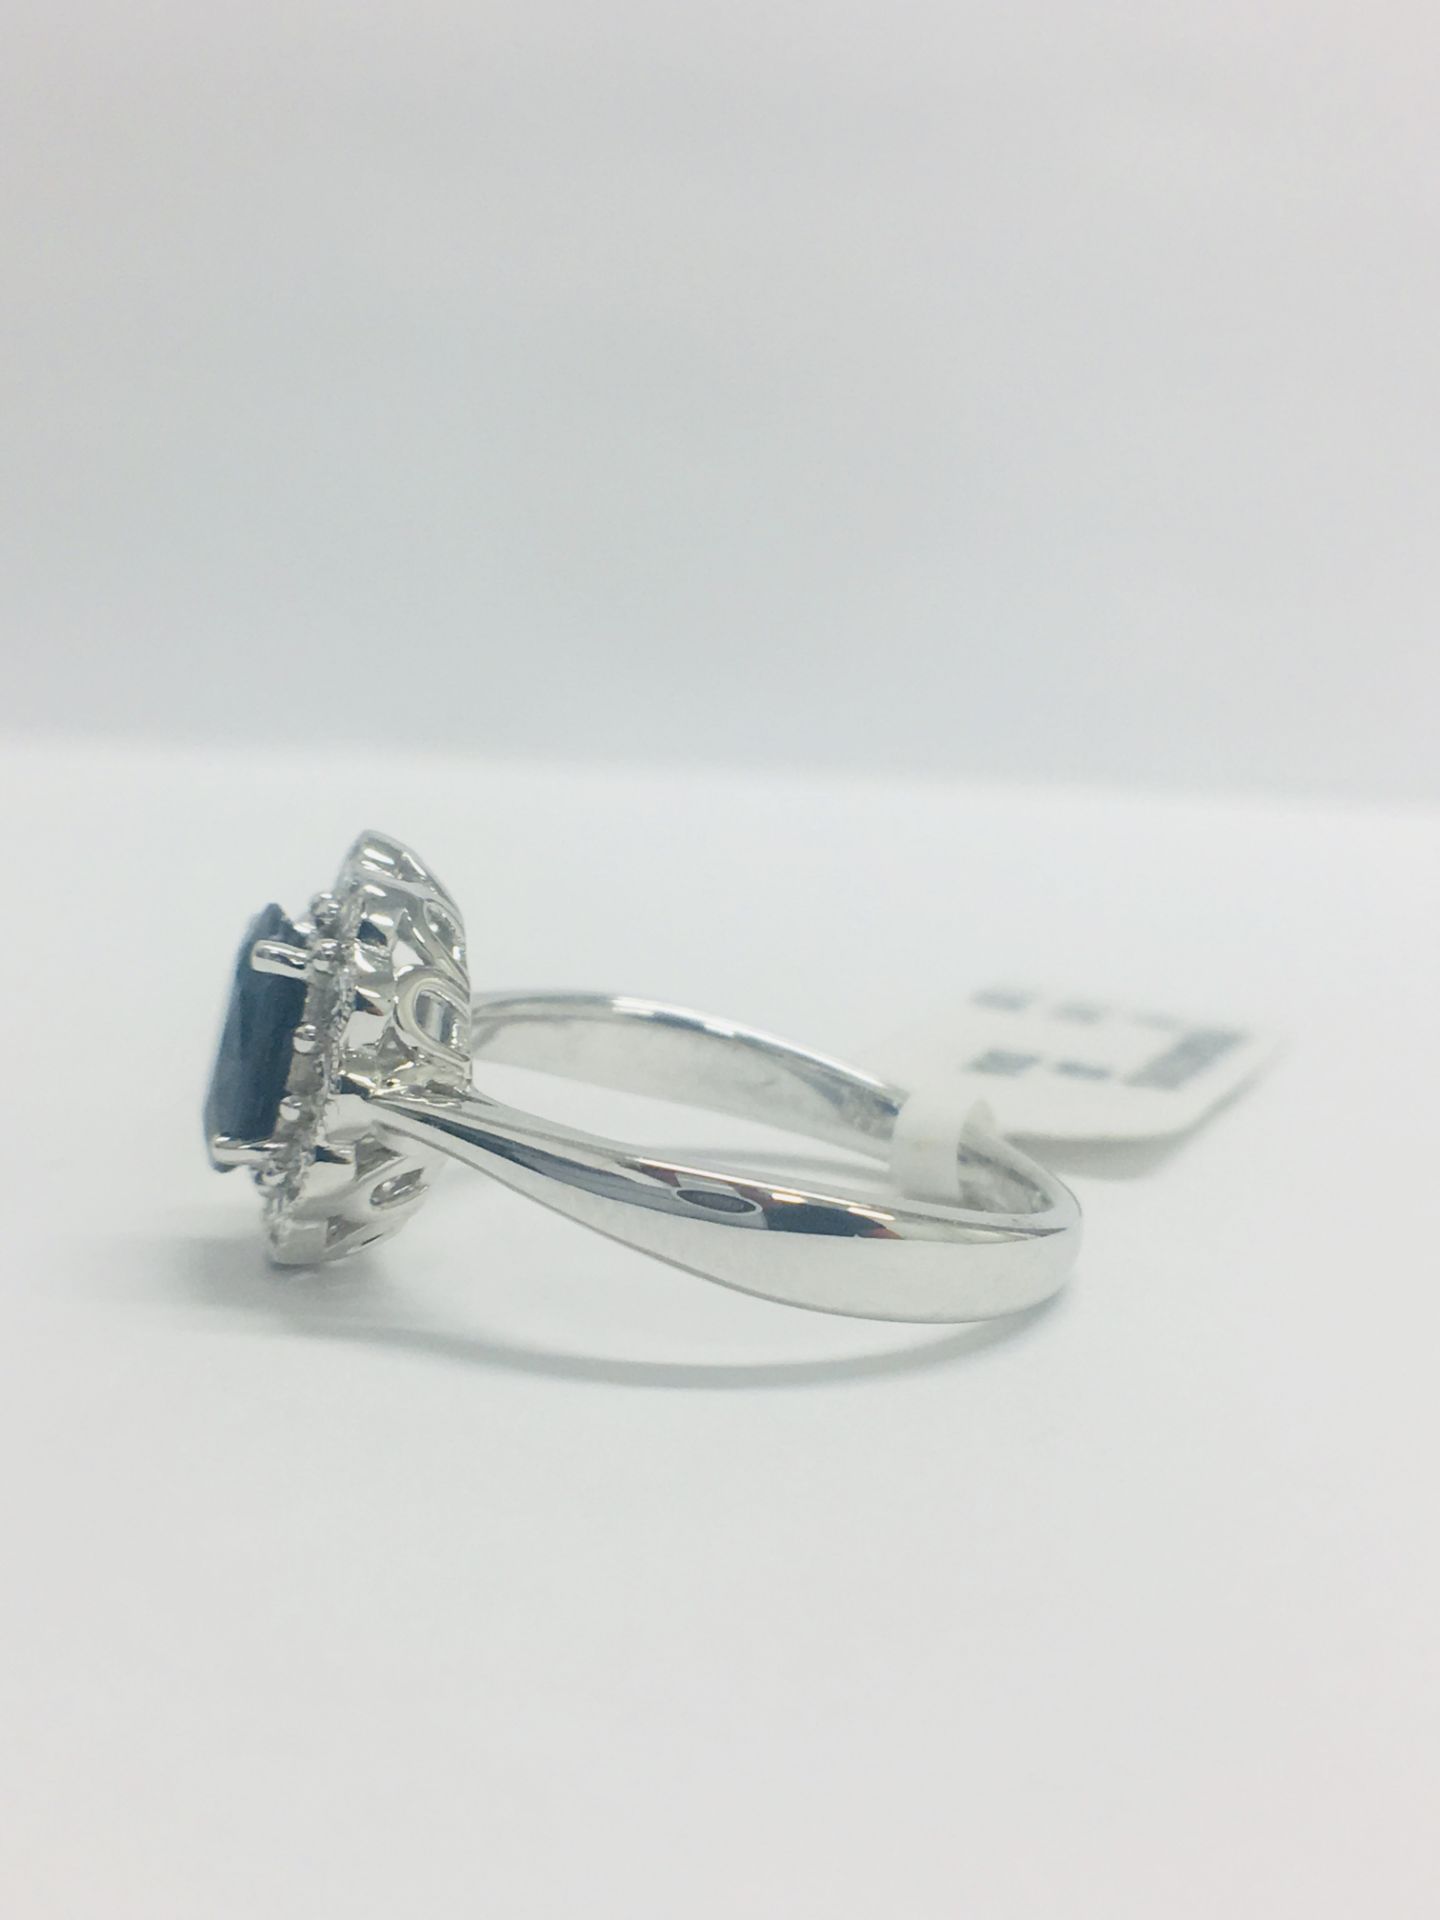 18ct White Gold Sapphire Diamond Cluster Ring - Image 3 of 9